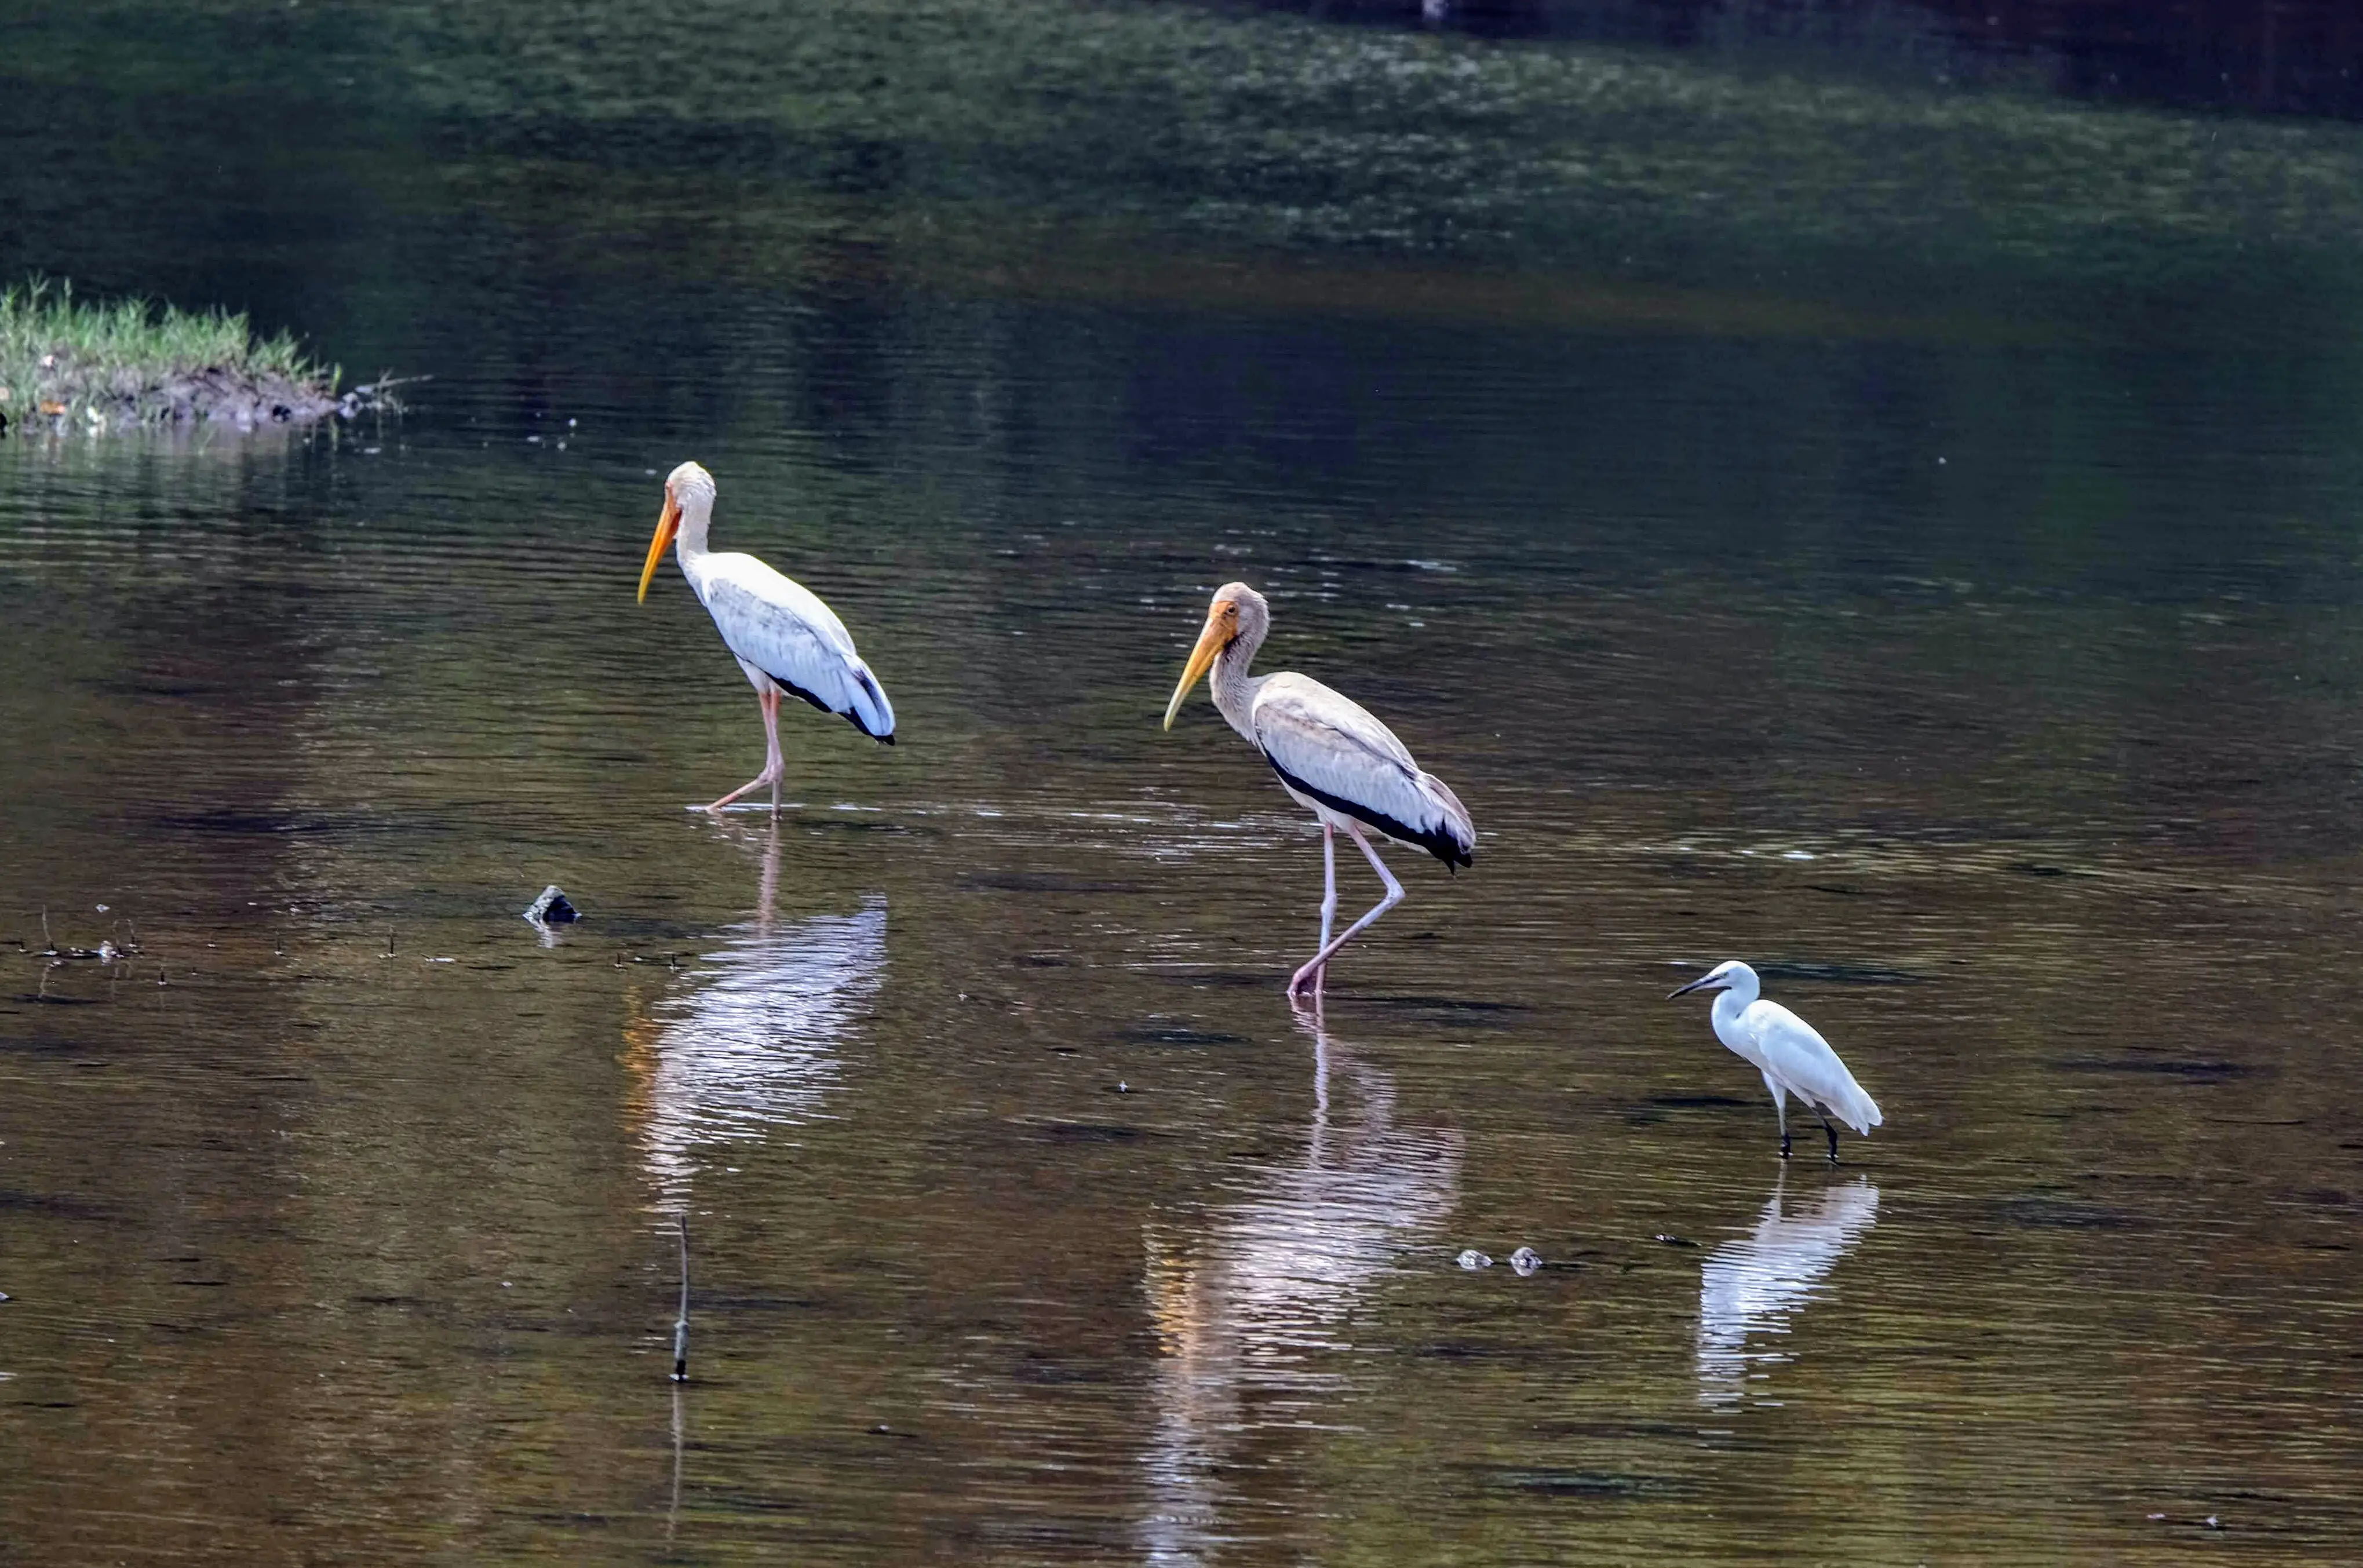 Painted storks and egret, Sungei Buloh, Singapore